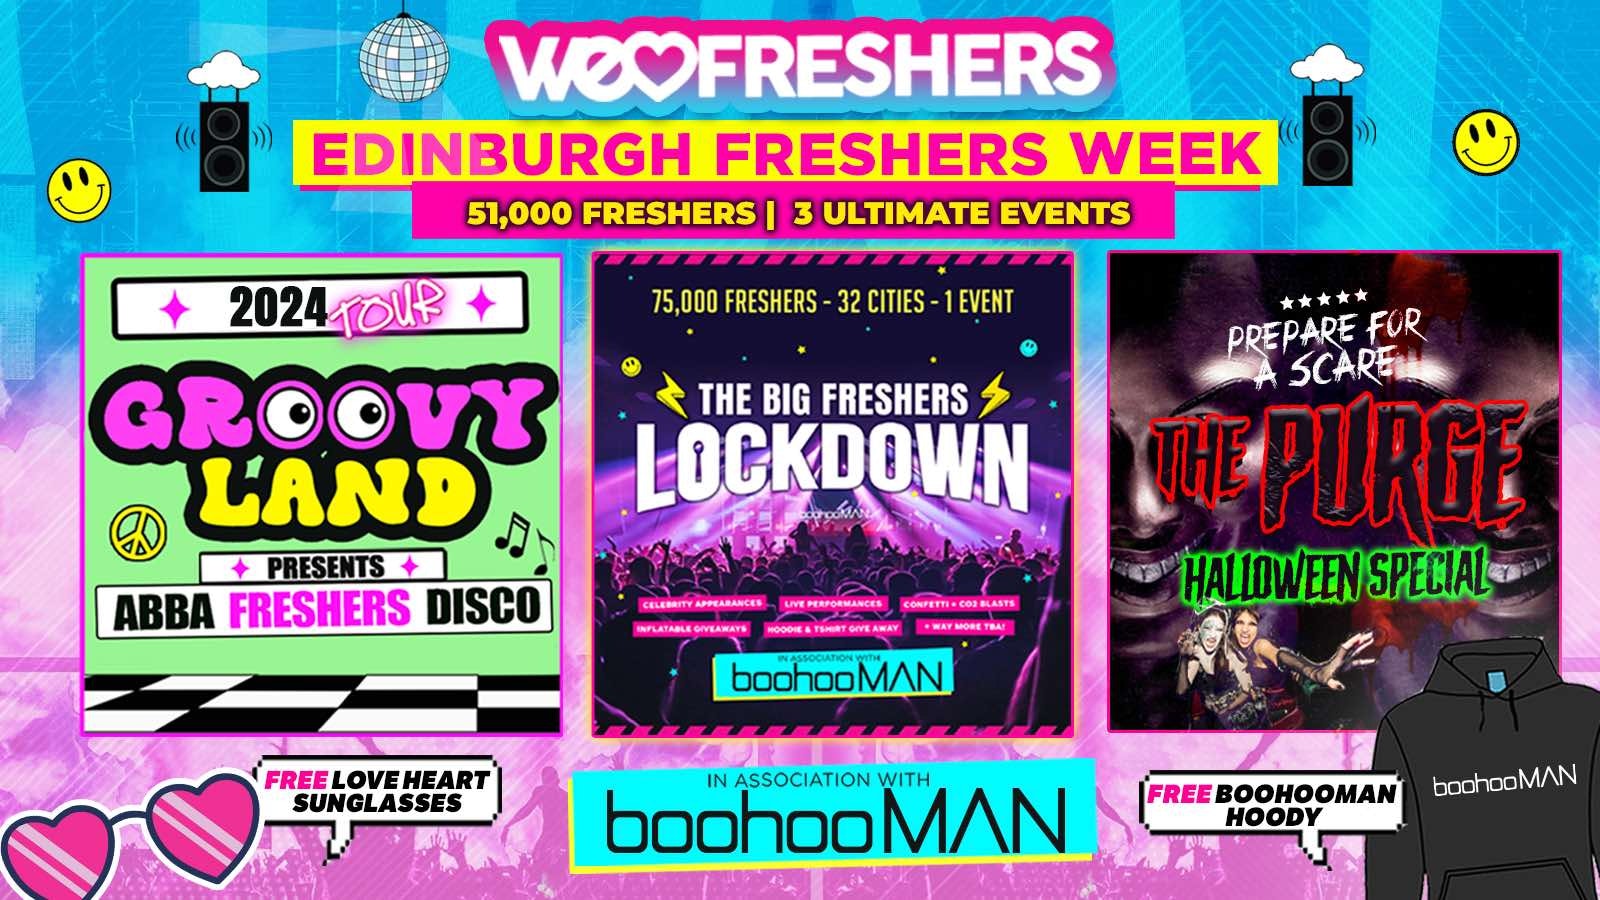 WE LOVE EDINBURGH FRESHERS 2024 in association with boohooMAN ❗FREE BOOHOOMAN HOODIE TODAY ONLY❗